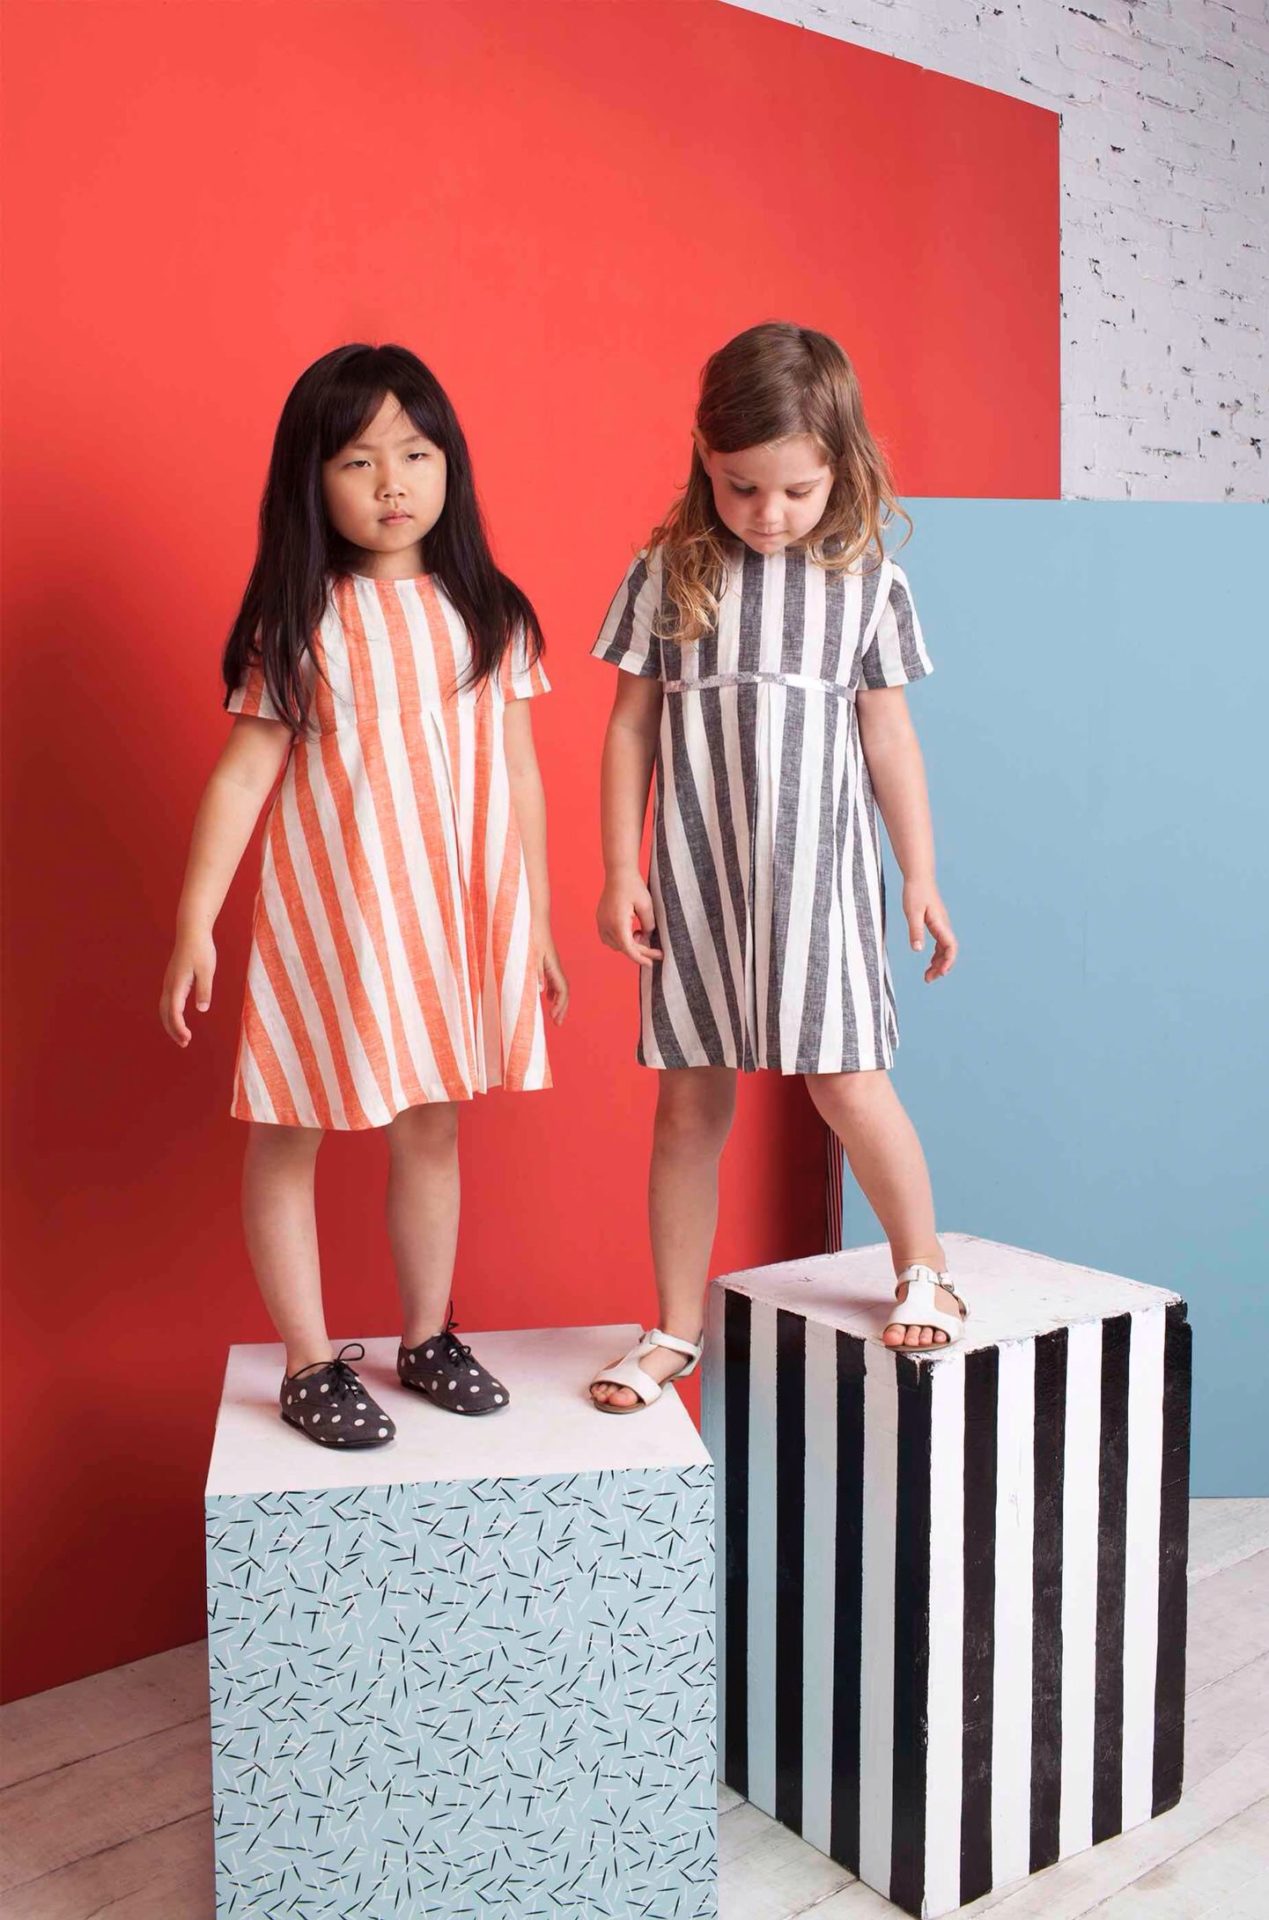 Bold stripes for girlswear at Milk & Biscuits summer dresses 